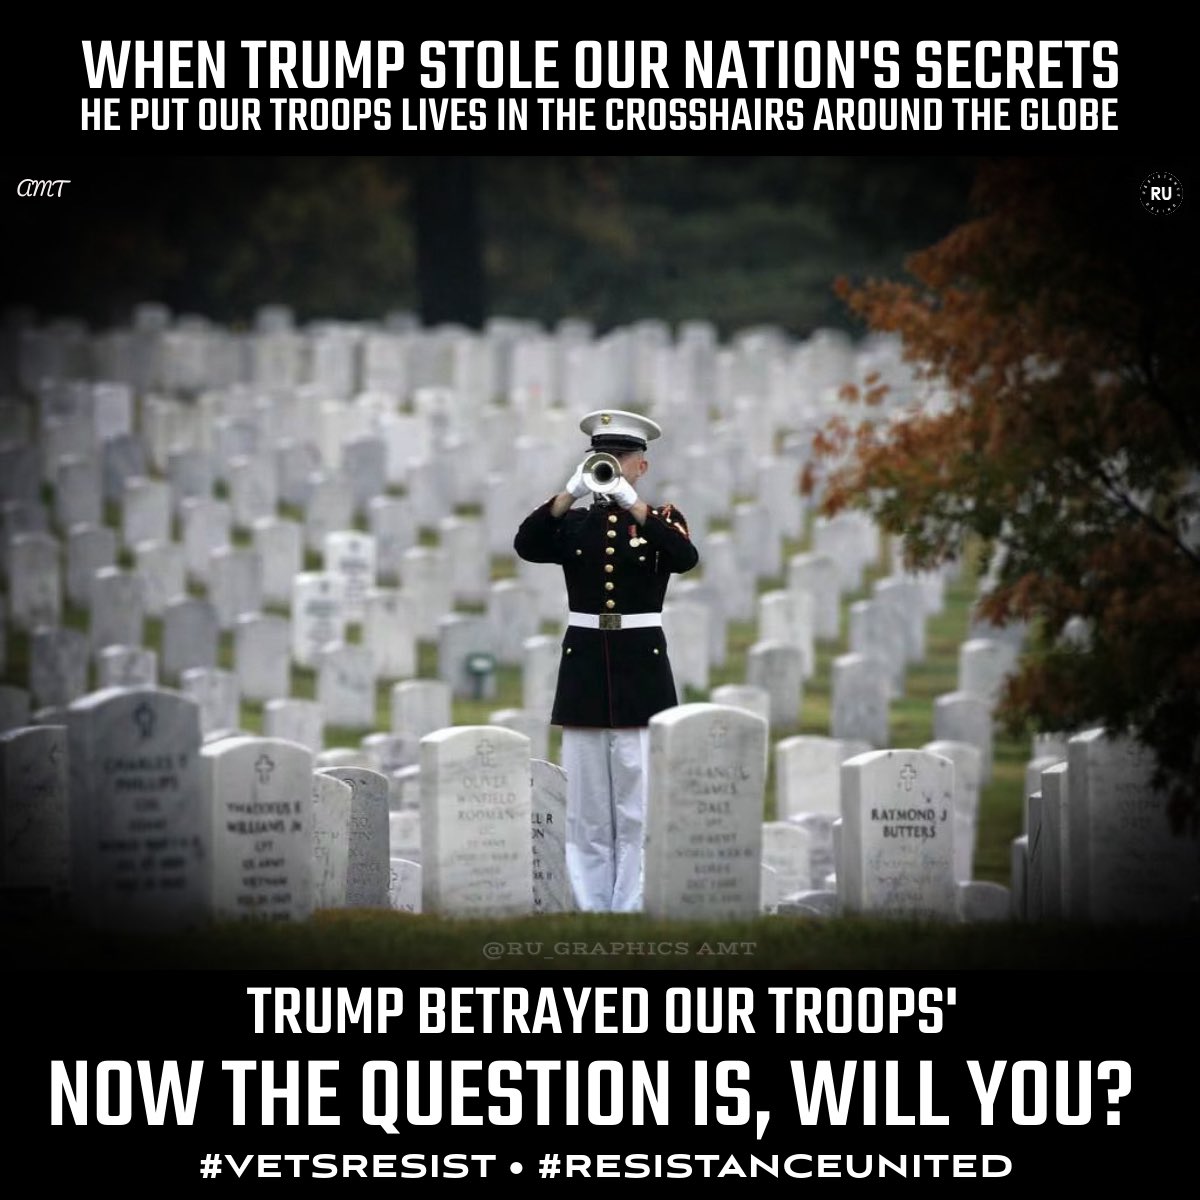 #Resistanceunited ☢️ secrets, troop locations & capabilities, planned movements, undercover assets in hostile countries & + This is what Trump stole w/📦MIA Unimaginable damage to Natl Security & risking our lives around🌏 Trump is a traitor who betrayed us Will🇺🇸do the same?